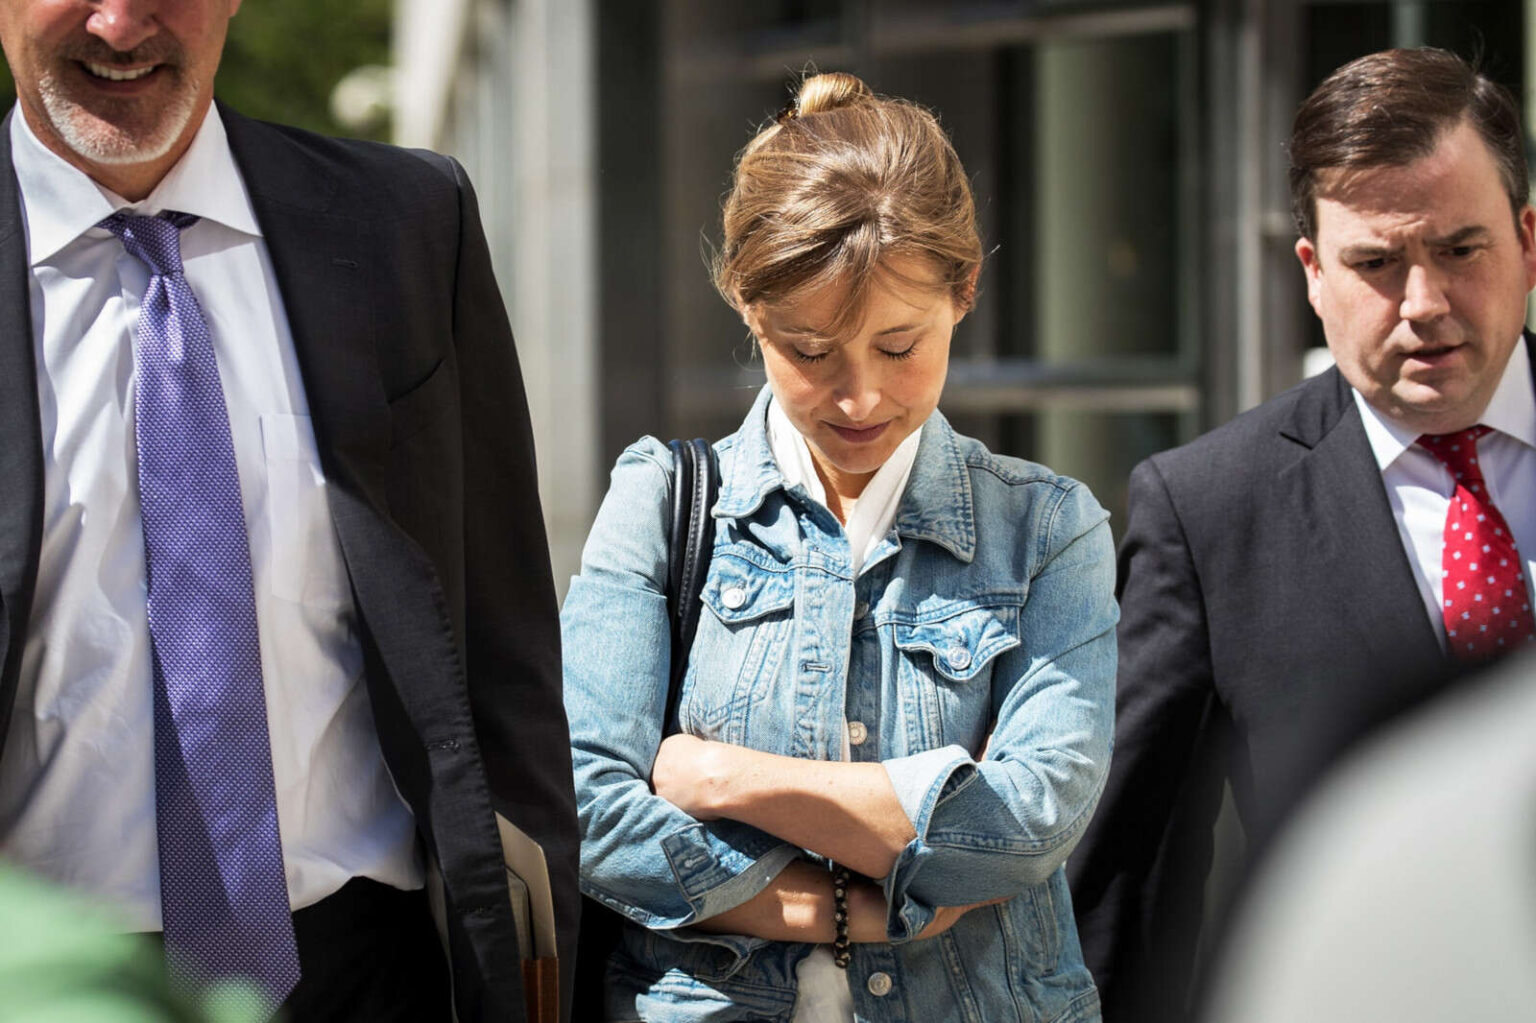 After nearly two years since pleading guilty, Allison Mack was sentenced for her role in NXIVM. Discover if she'll serve time for her crimes in the cult.